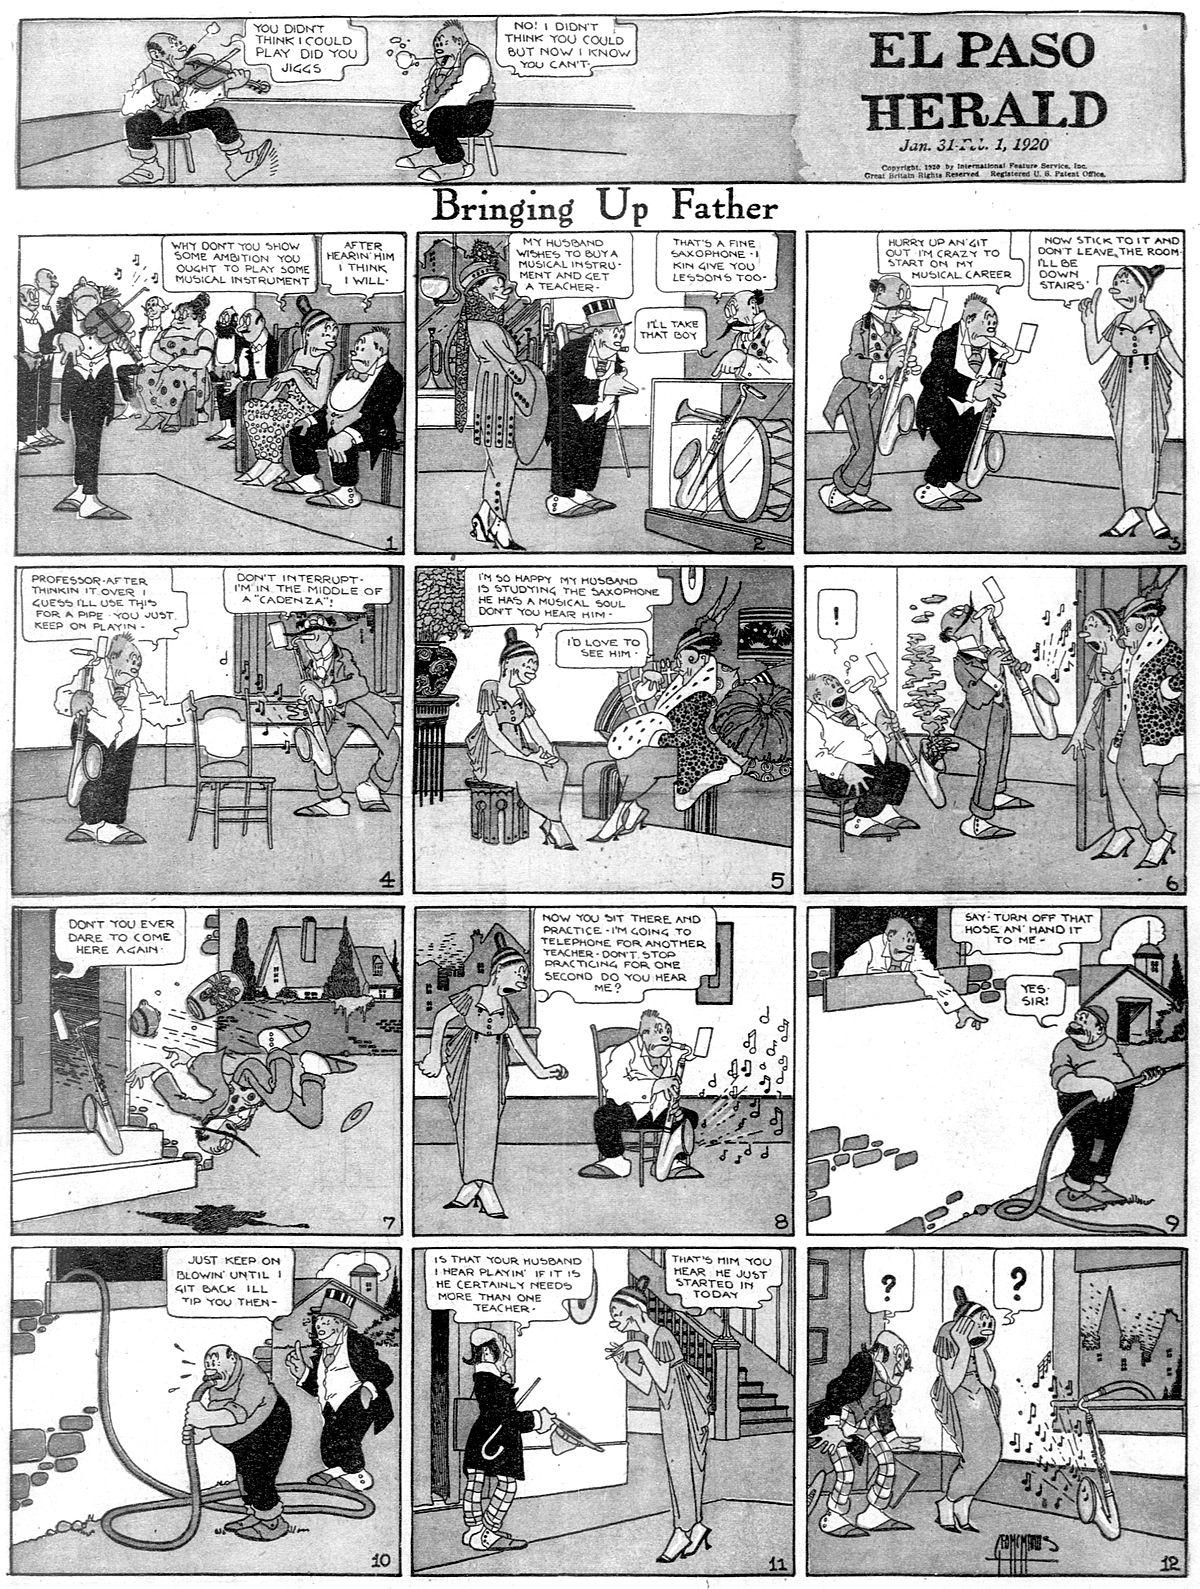 Comic strip appeared in us newspapers between 1913 and 1944